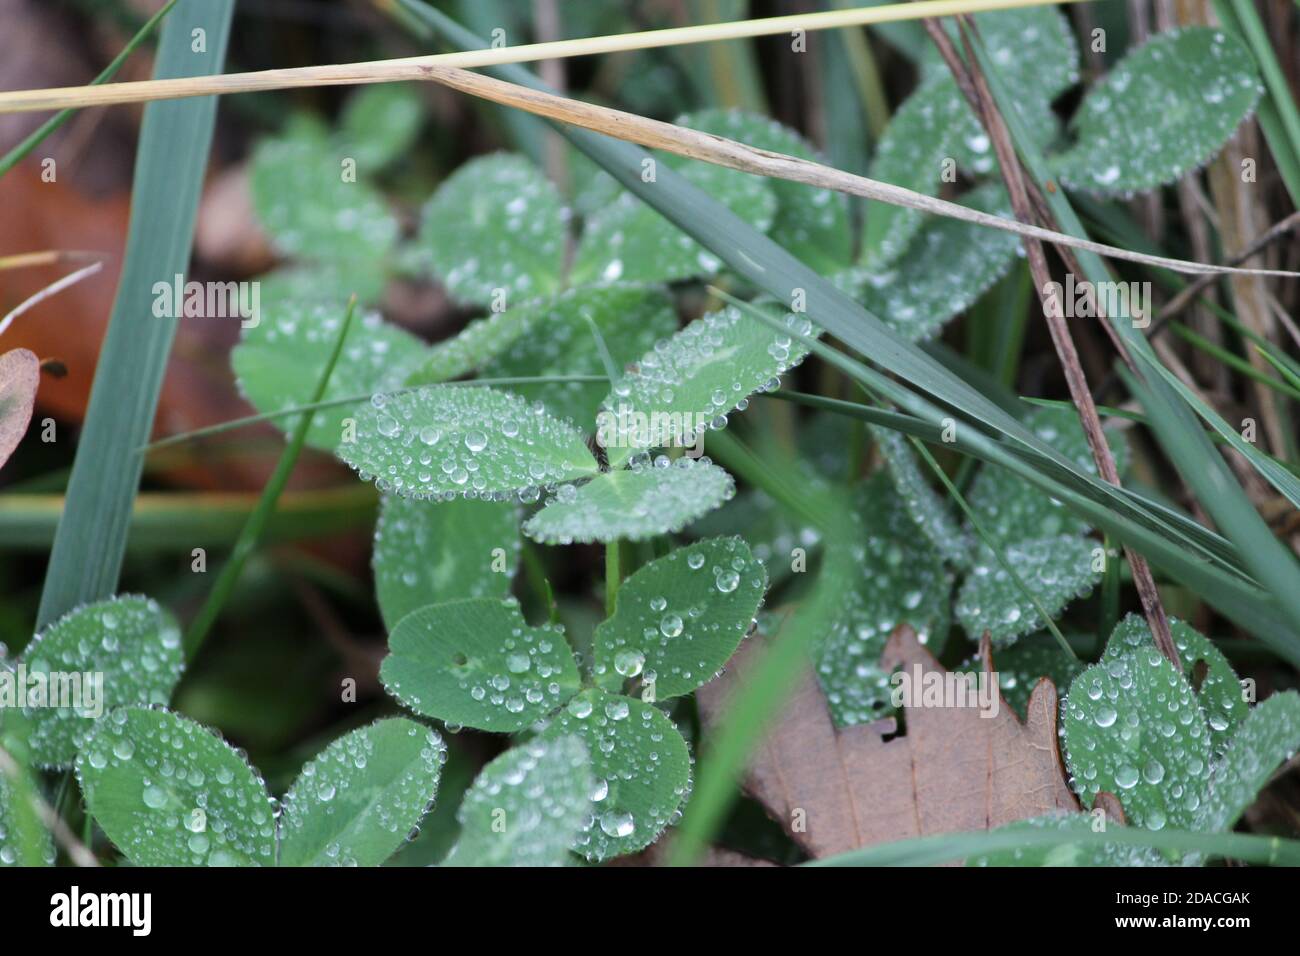 Water droplets on clover Stock Photo